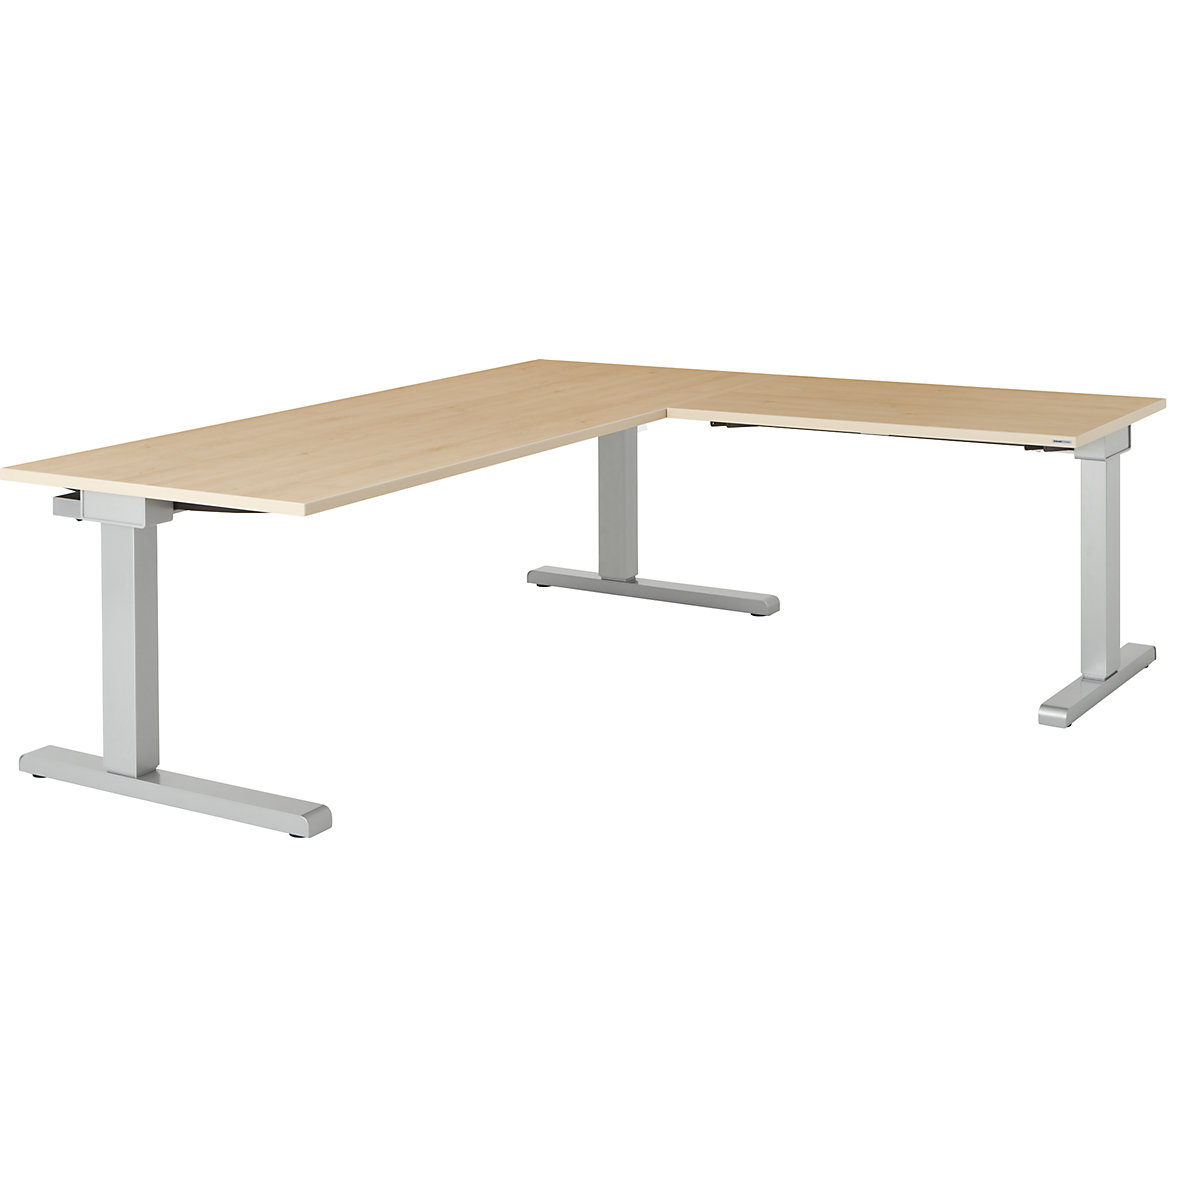 Desk, interlinked – mauser, WxD 1800 x 800 mm, angled extension on right (width 1000 mm), maple finish top, white aluminium frame-2